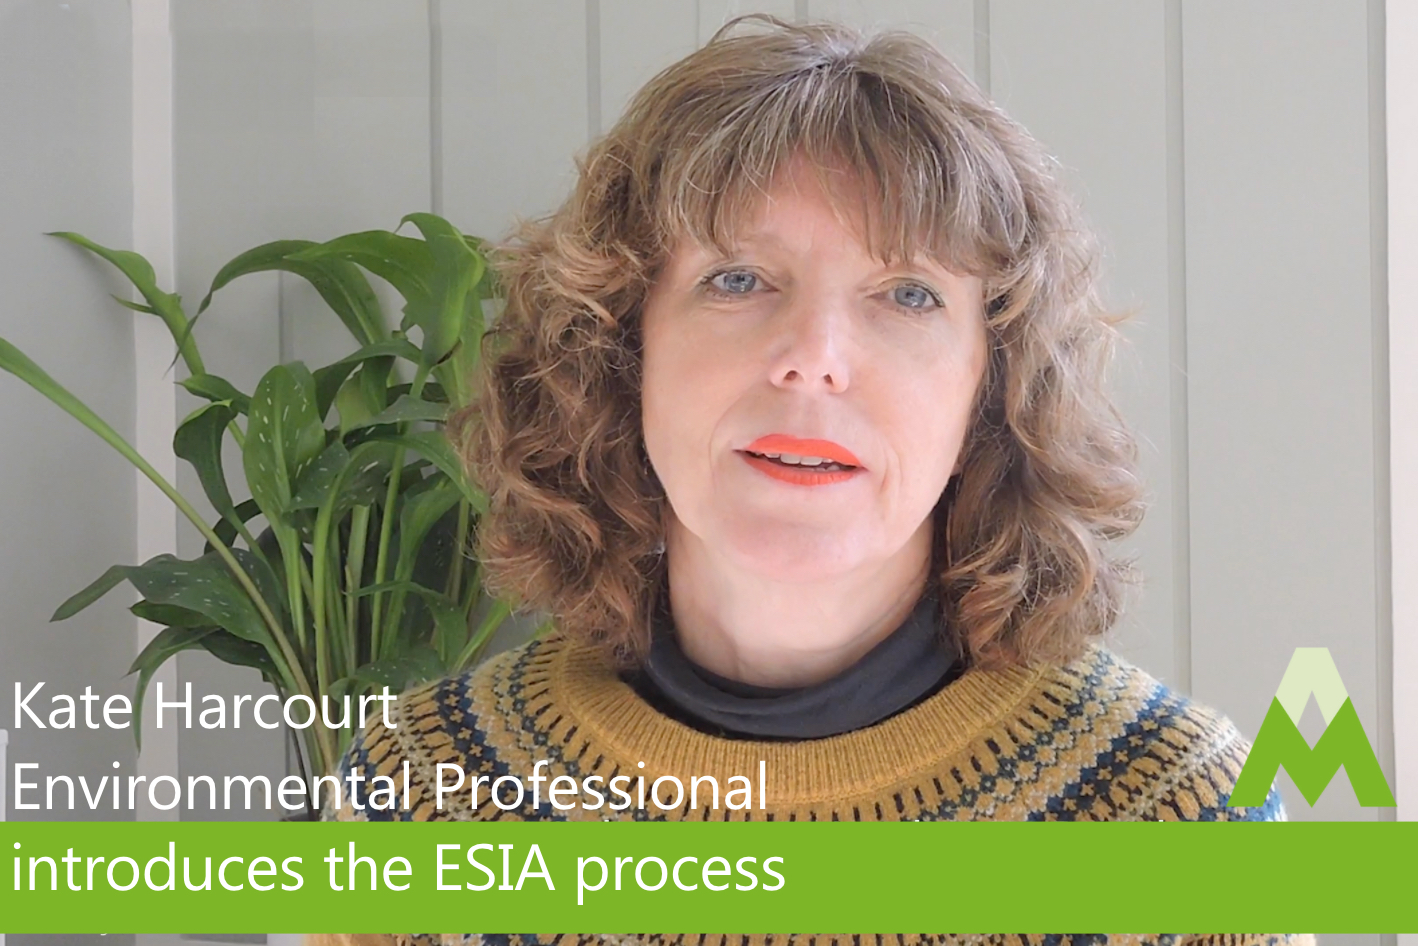 Kate Harcourt-Environmental Professional introduces the ESIA process